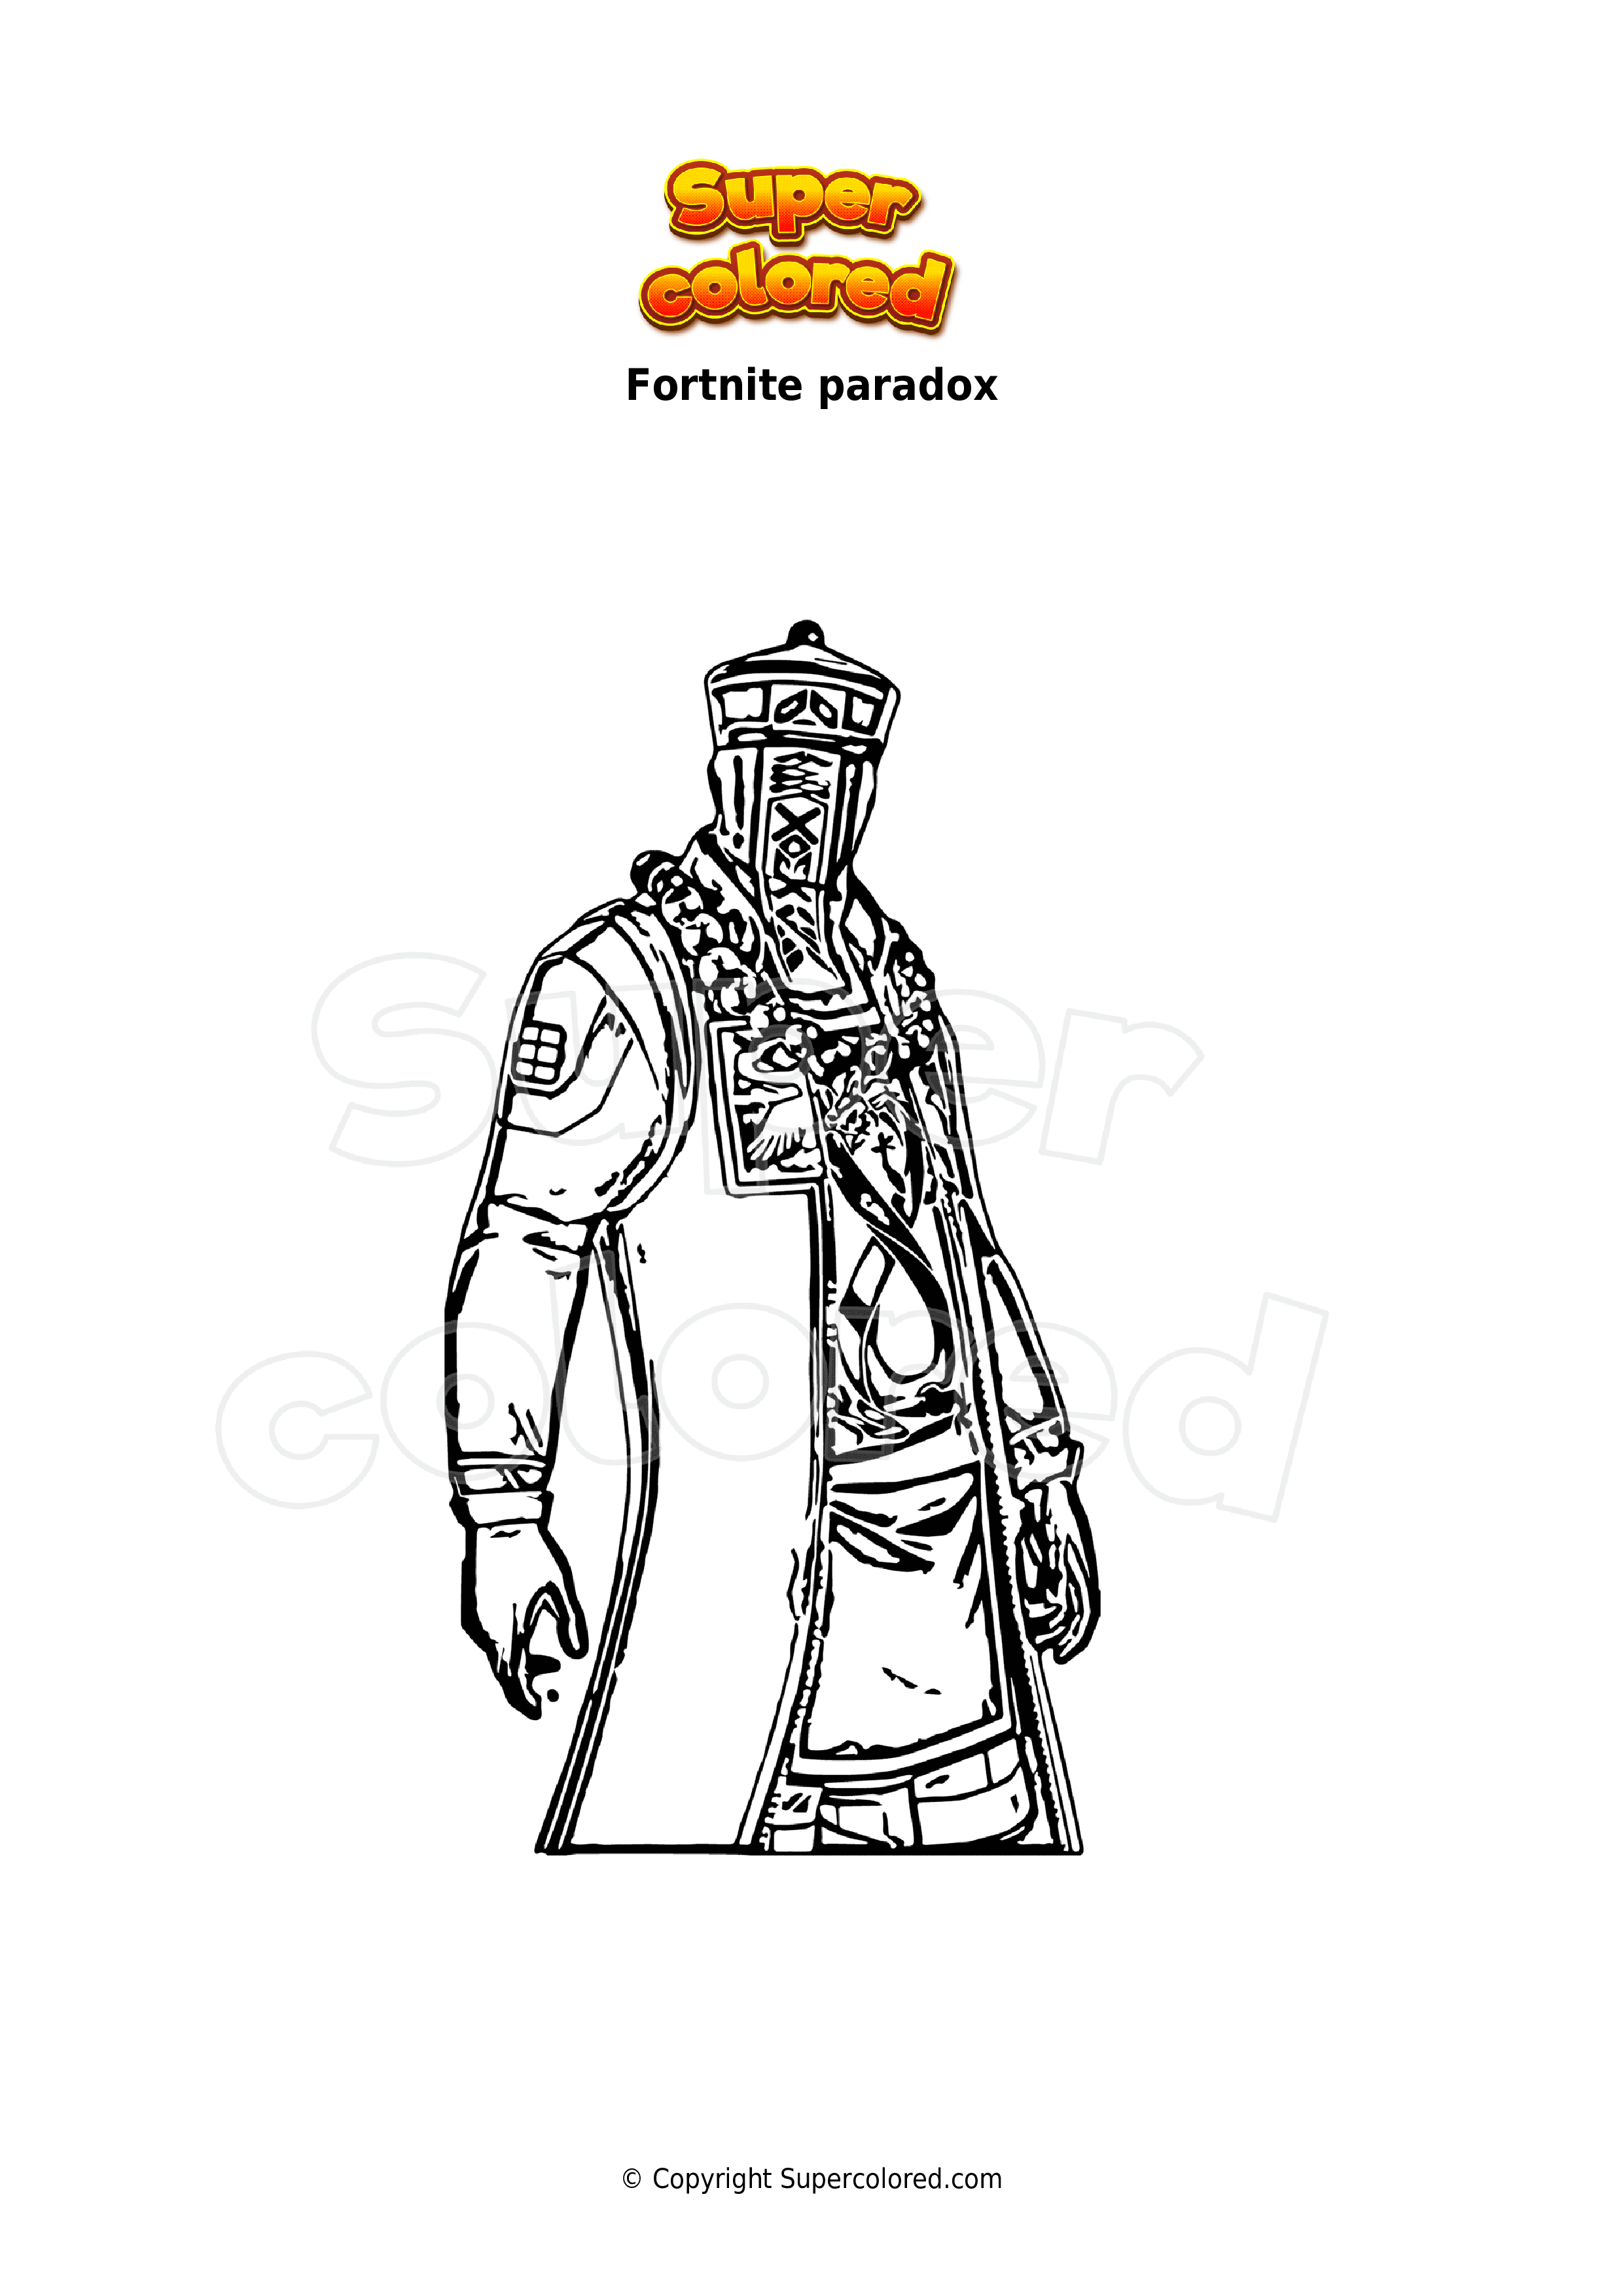 Coloring page fortnite paradox